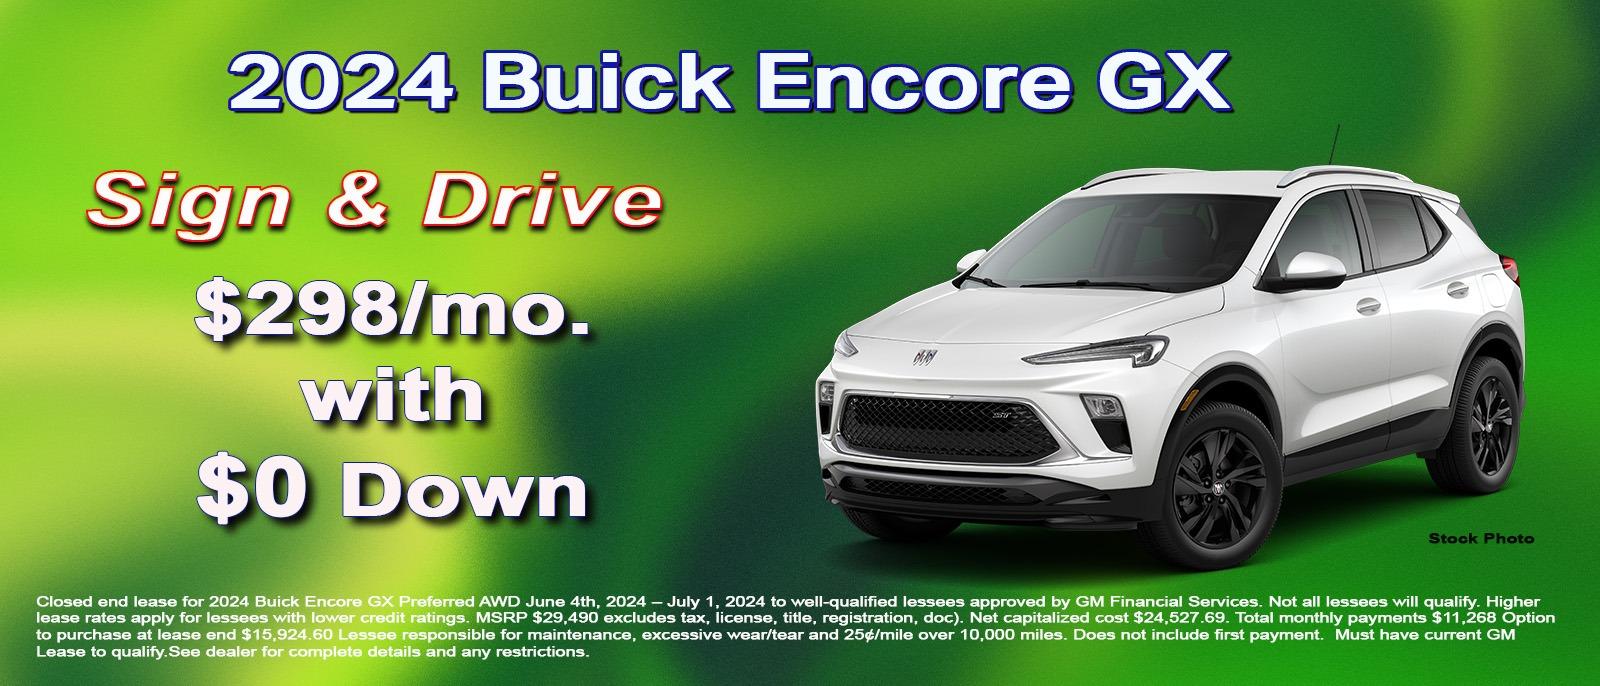 Sign and Drive on your new Buick Encore GX